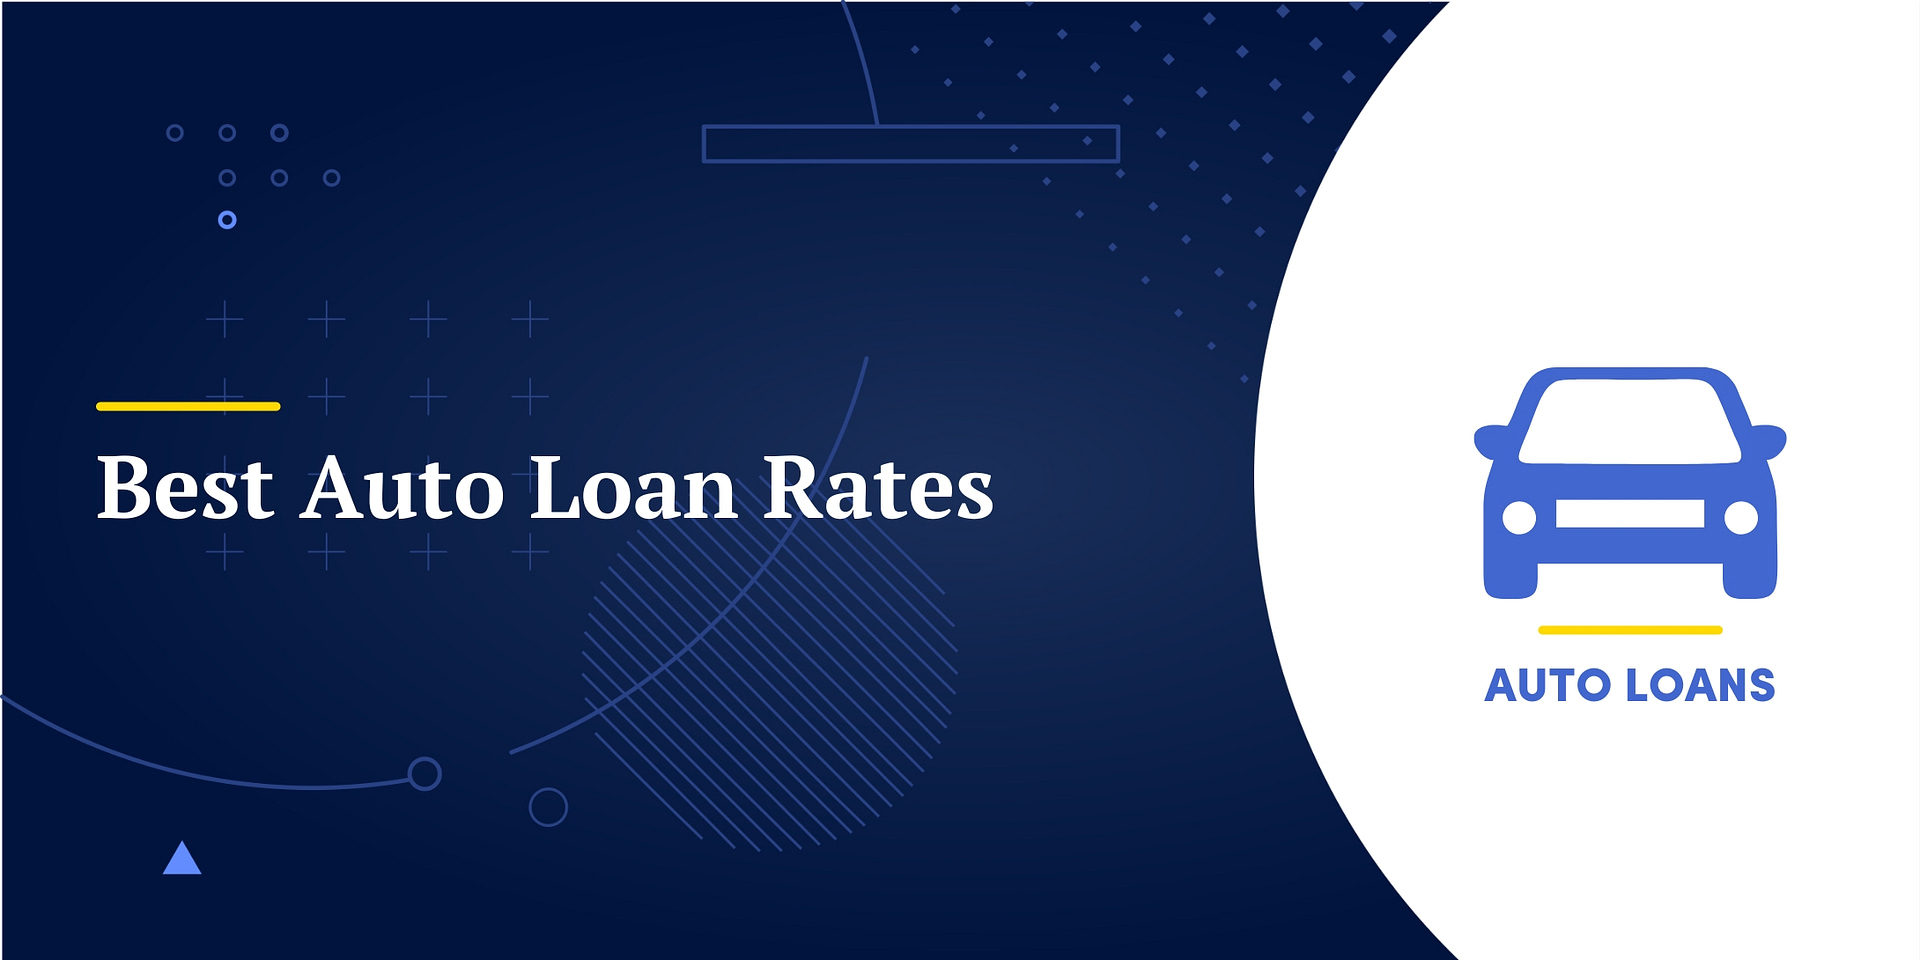 Auto Loan Rates for New & Used Cars